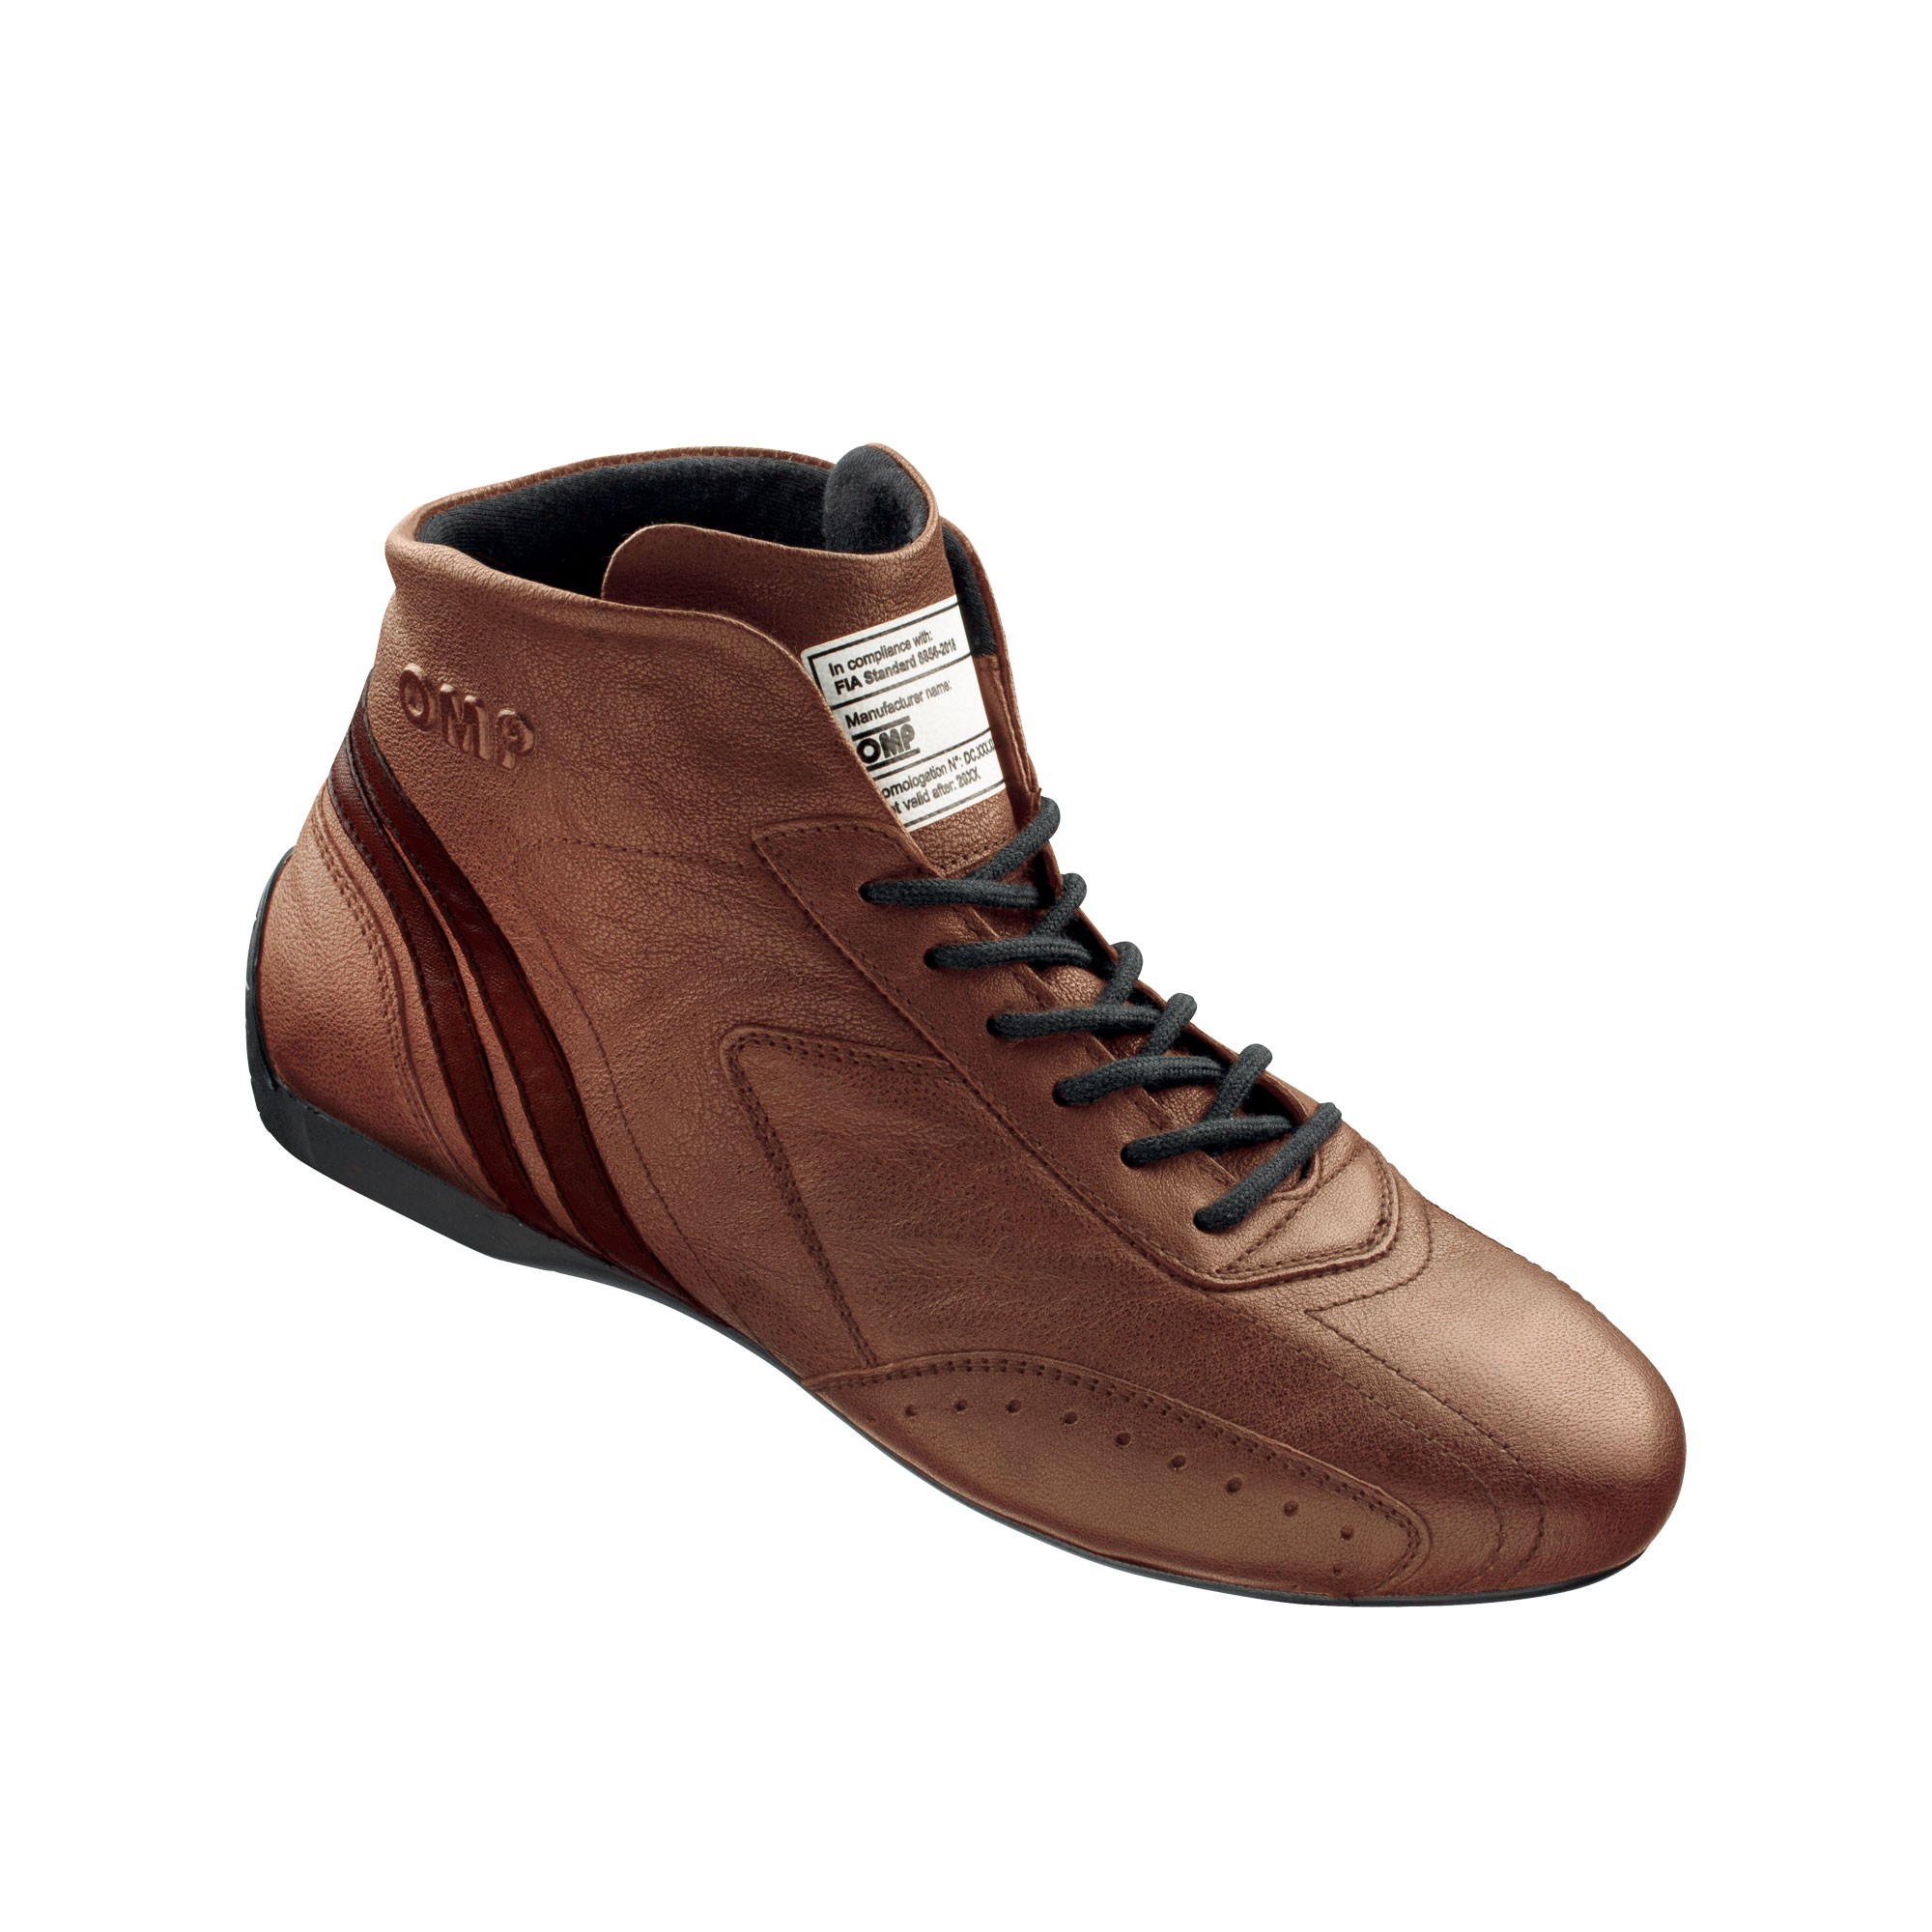 CARRERA LOW BOOTS my2021 BROWN SIZE 37 FIA 8856-2018